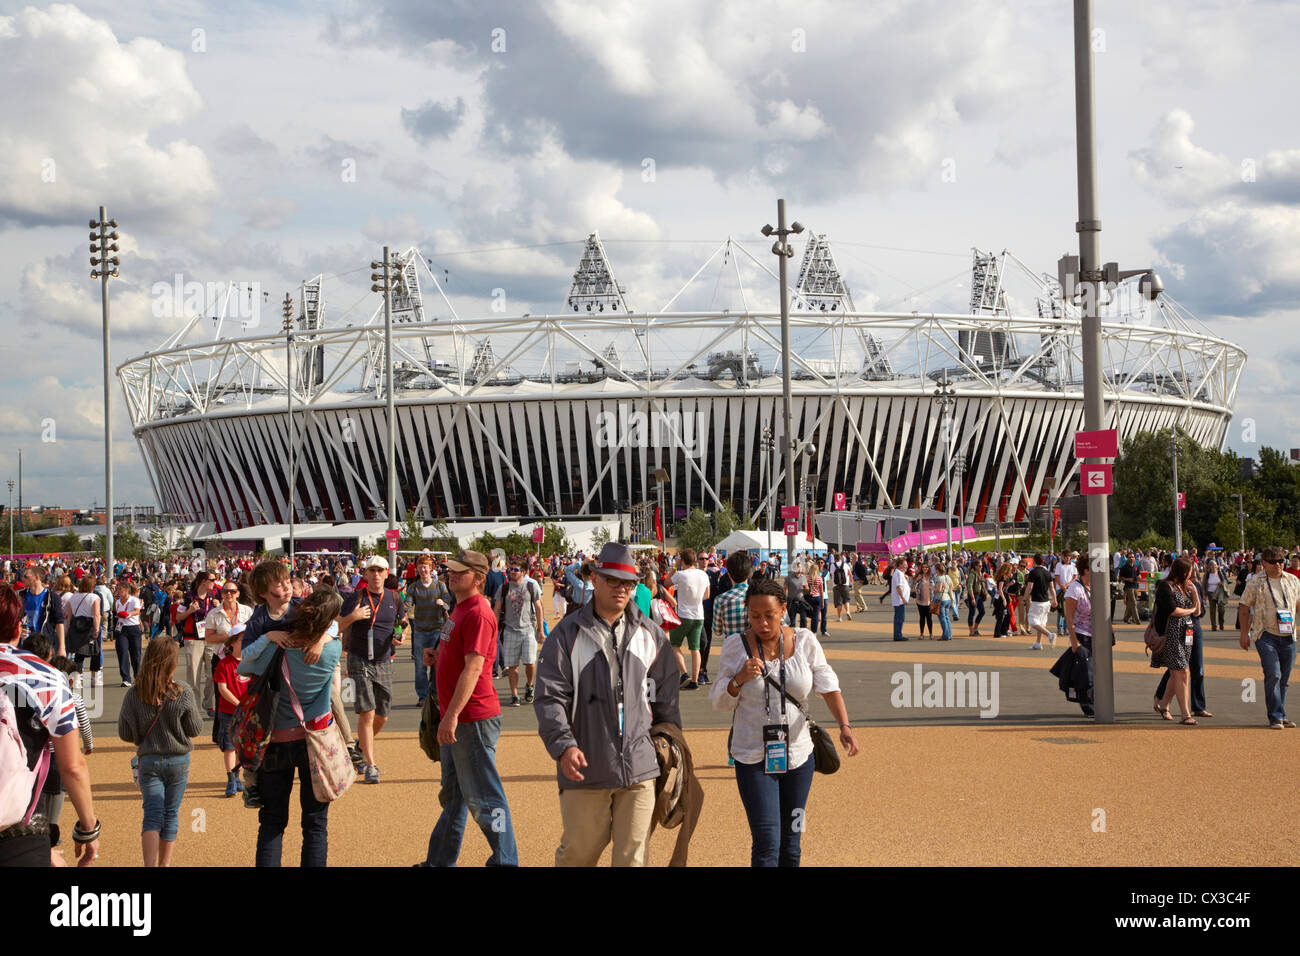 Olympic Stadium London 2012, London, United Kingdom. Architect: Populous, 2012. Overall view during games with spectators in for Stock Photo